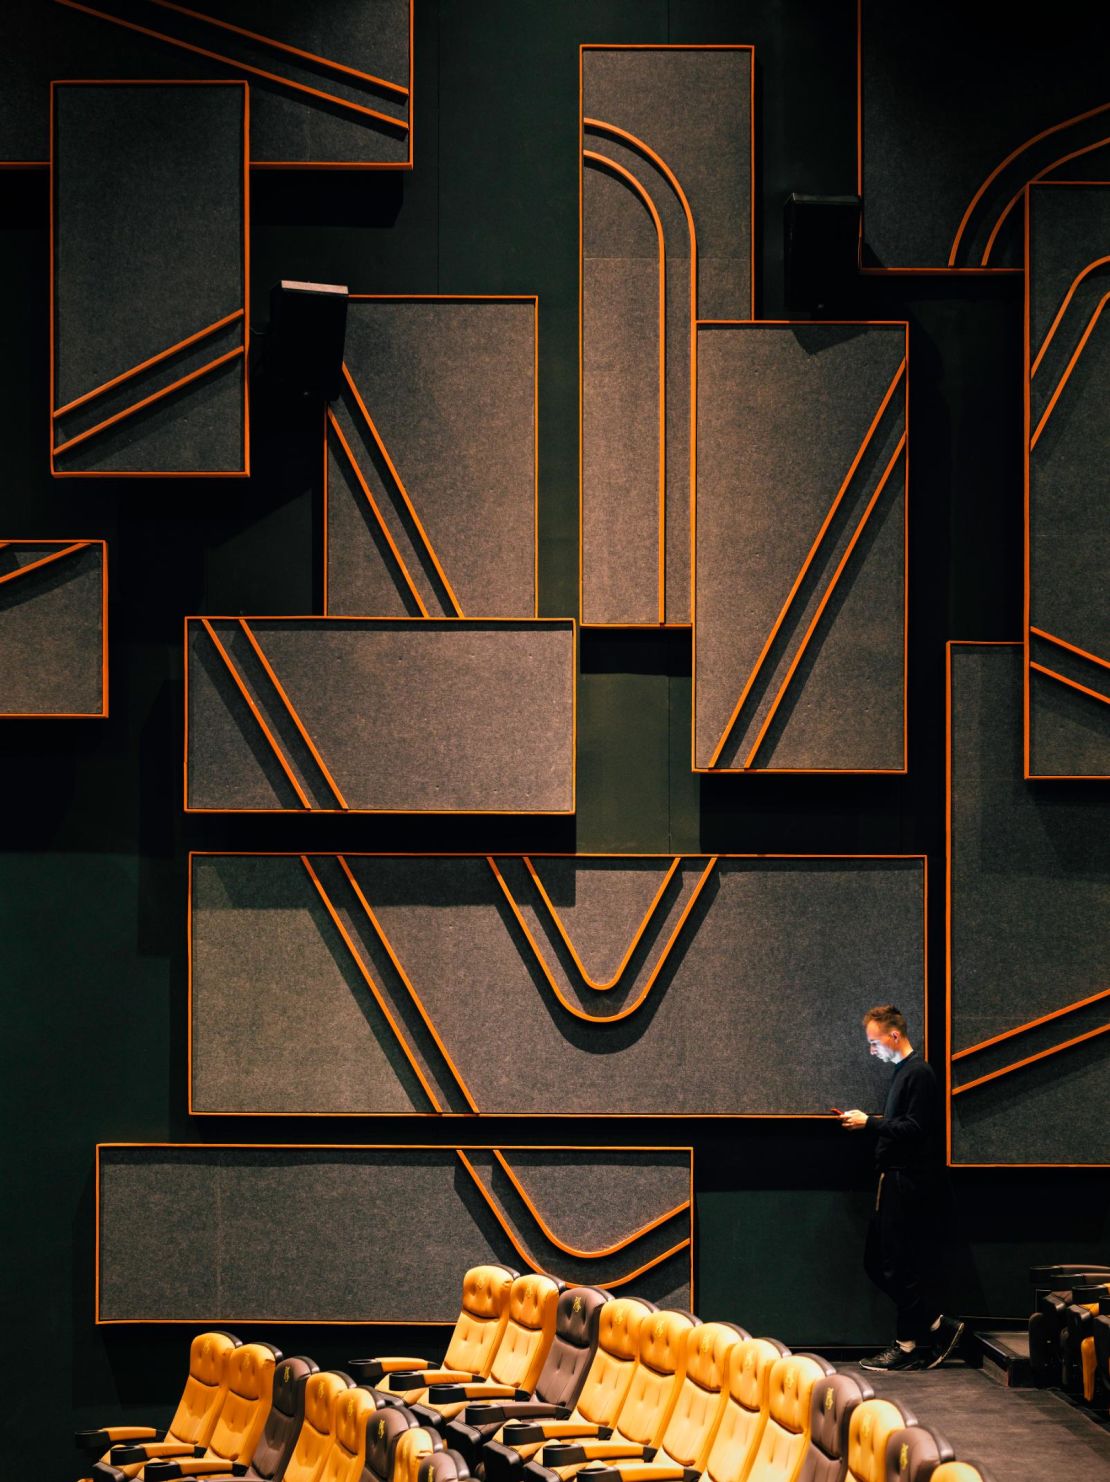 Form and function converge in the auditoriums of the Shanghai Omnijoi International Cinema, where acoustic materials and matte surfaces must be incorporated into the design.